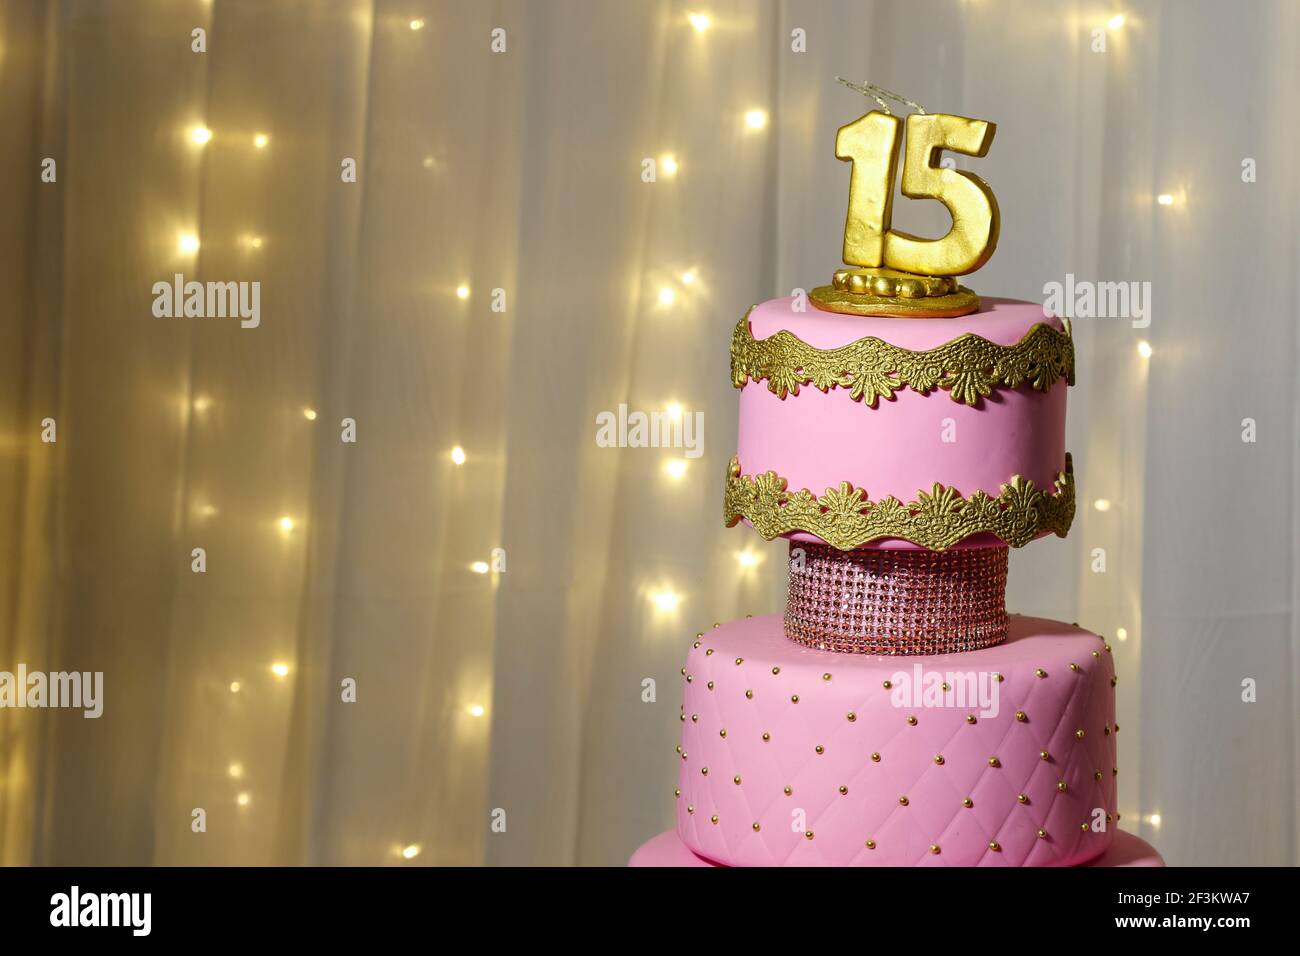 Happy birthday cake card 15 fifteen year party Vector Image